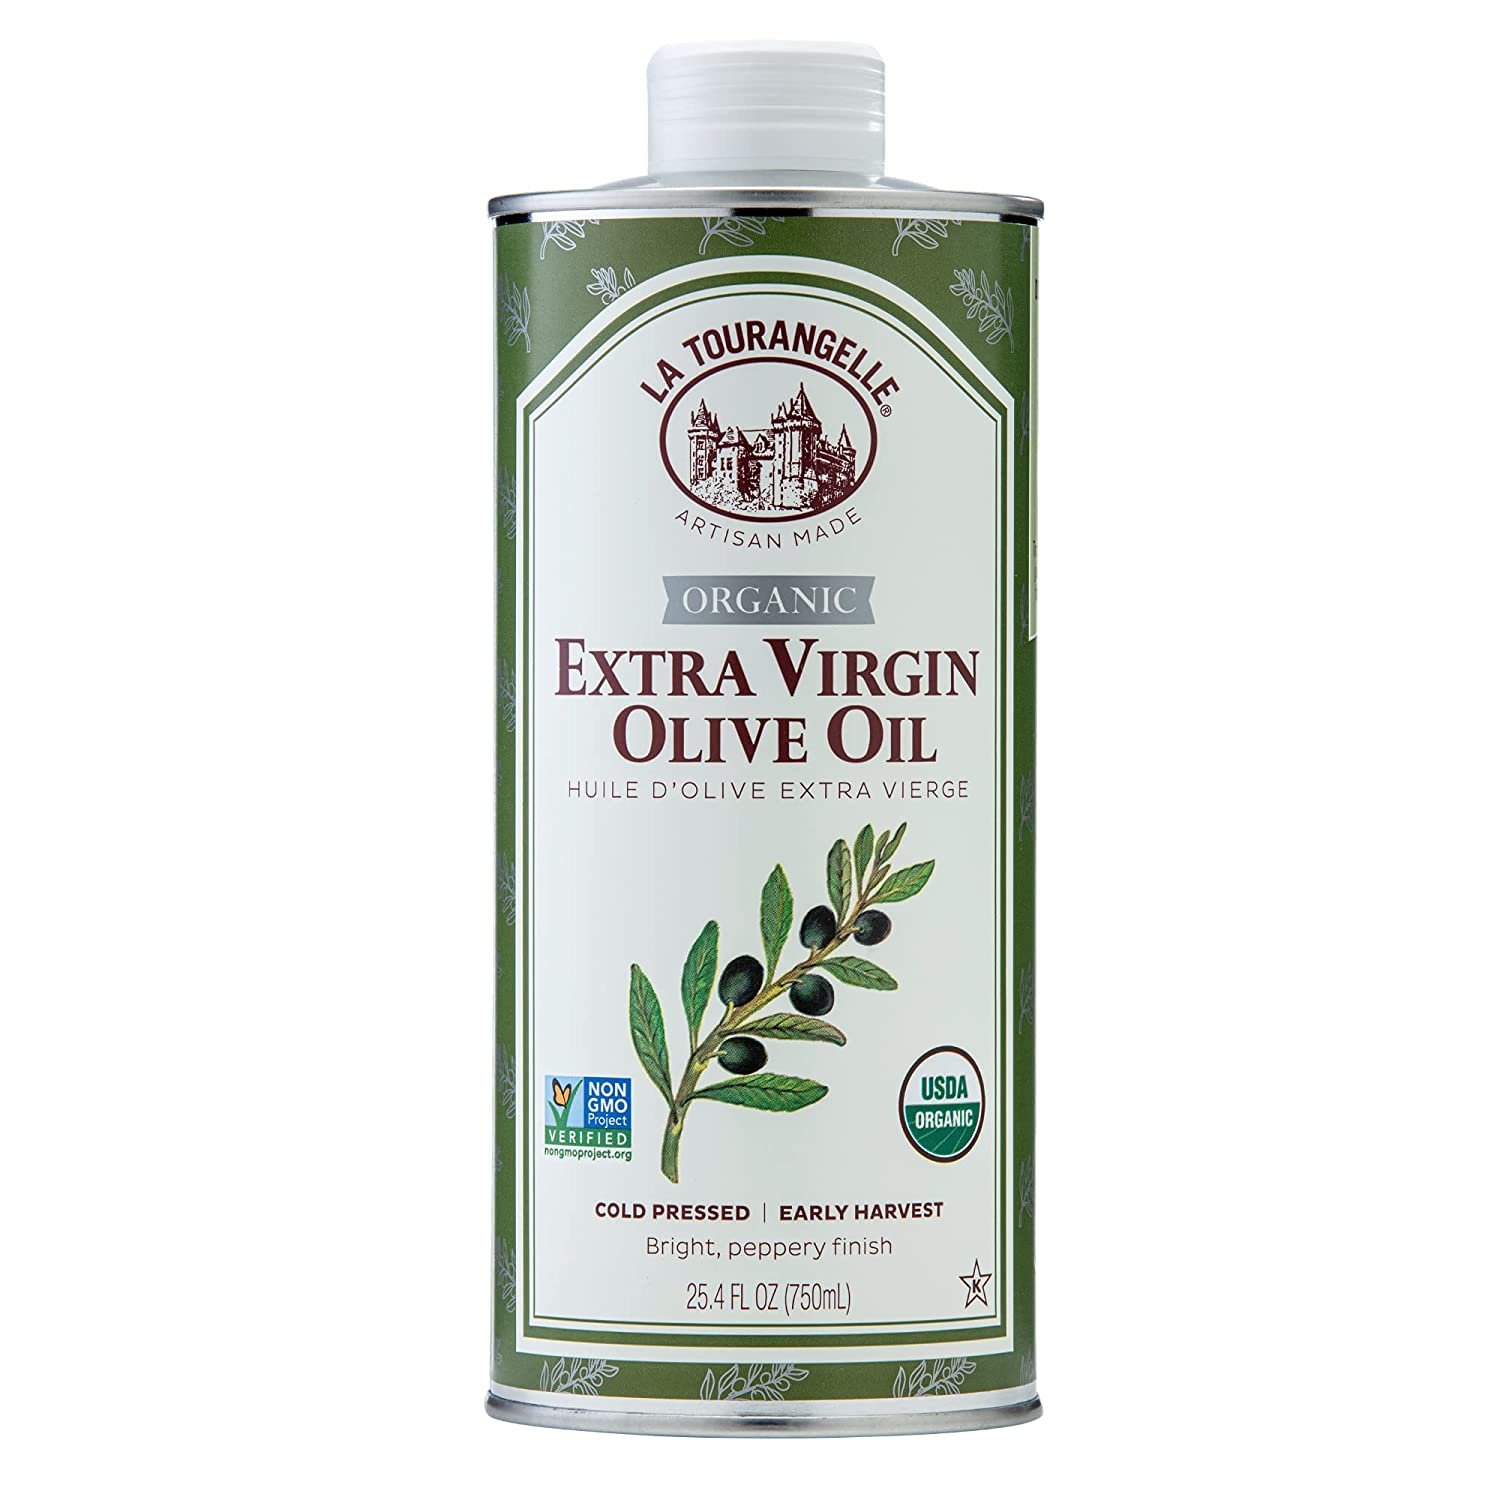 Olive oil can be used as a mountain bike chain lubricant alternative if you are out and you need some kind of lubricant urgently.